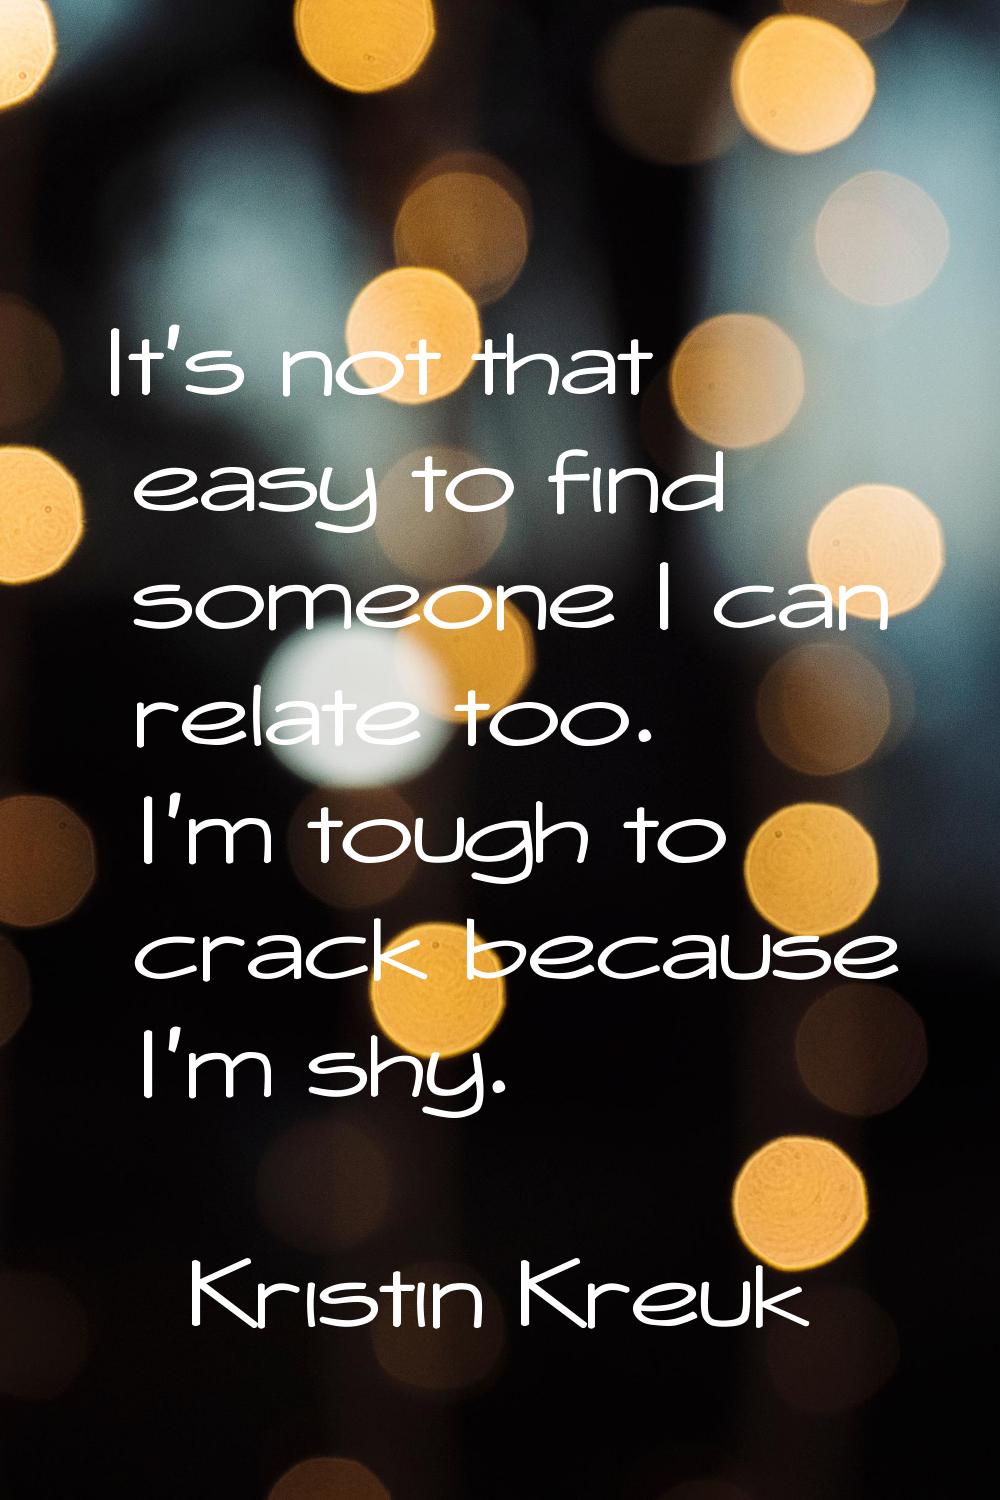 It's not that easy to find someone I can relate too. I'm tough to crack because I'm shy.